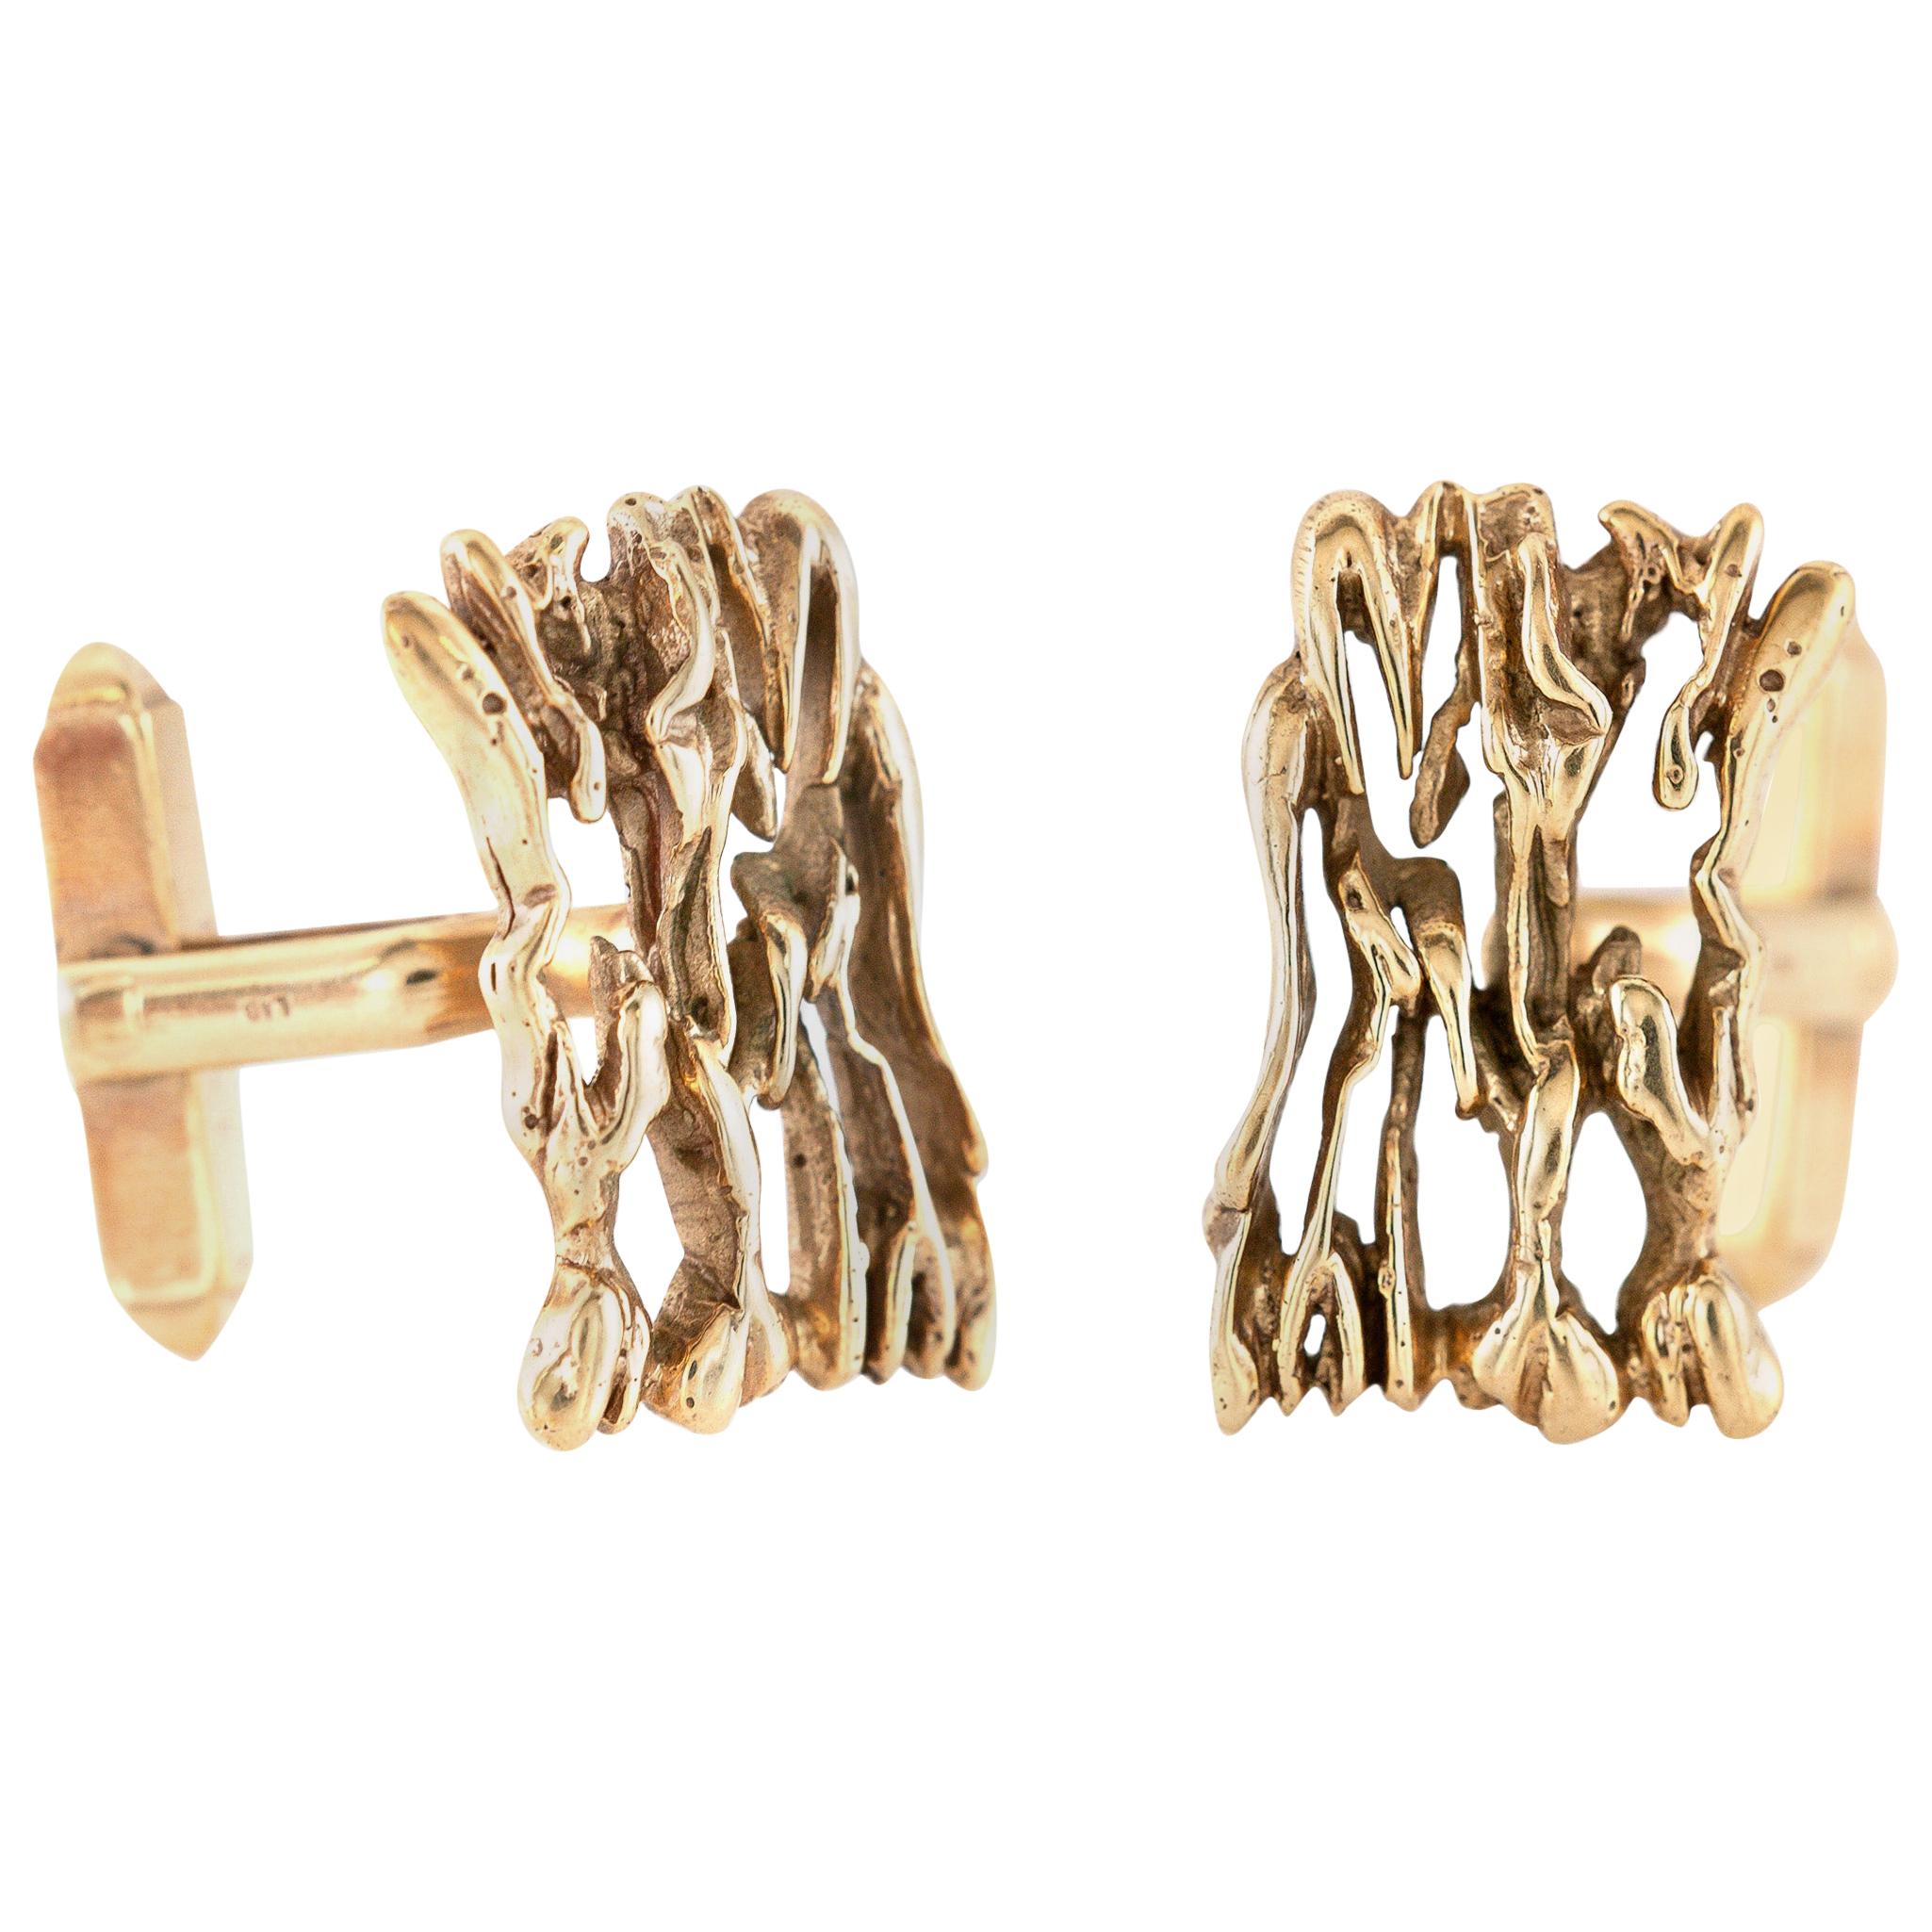 Rough Gold Cufflinks For Sale